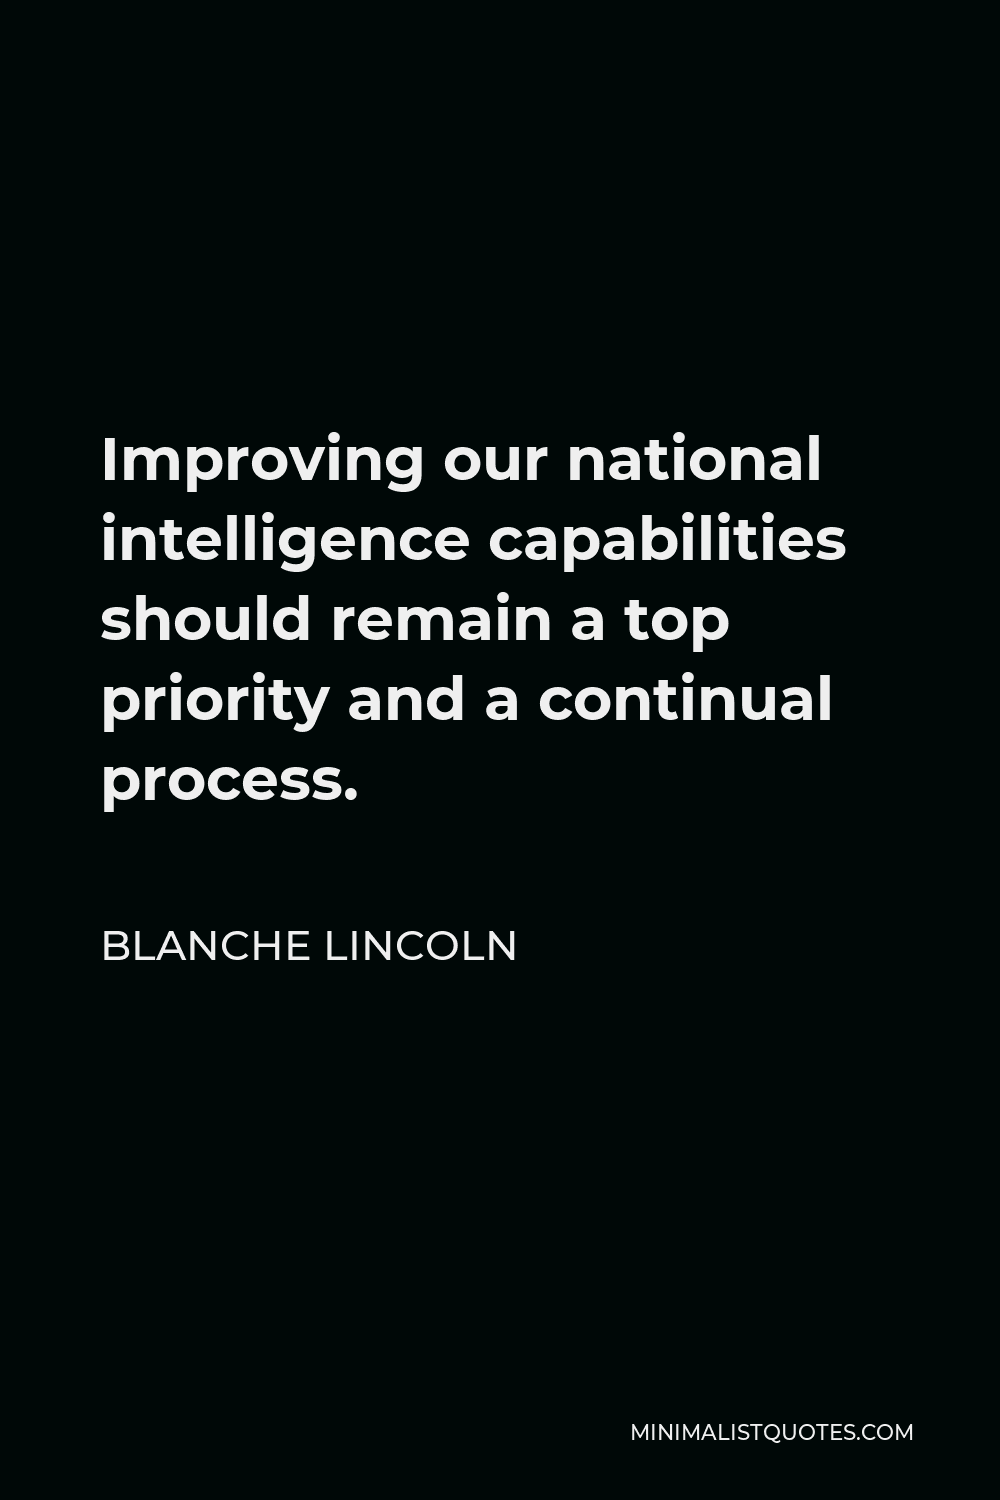 Blanche Lincoln Quote - Improving our national intelligence capabilities should remain a top priority and a continual process.